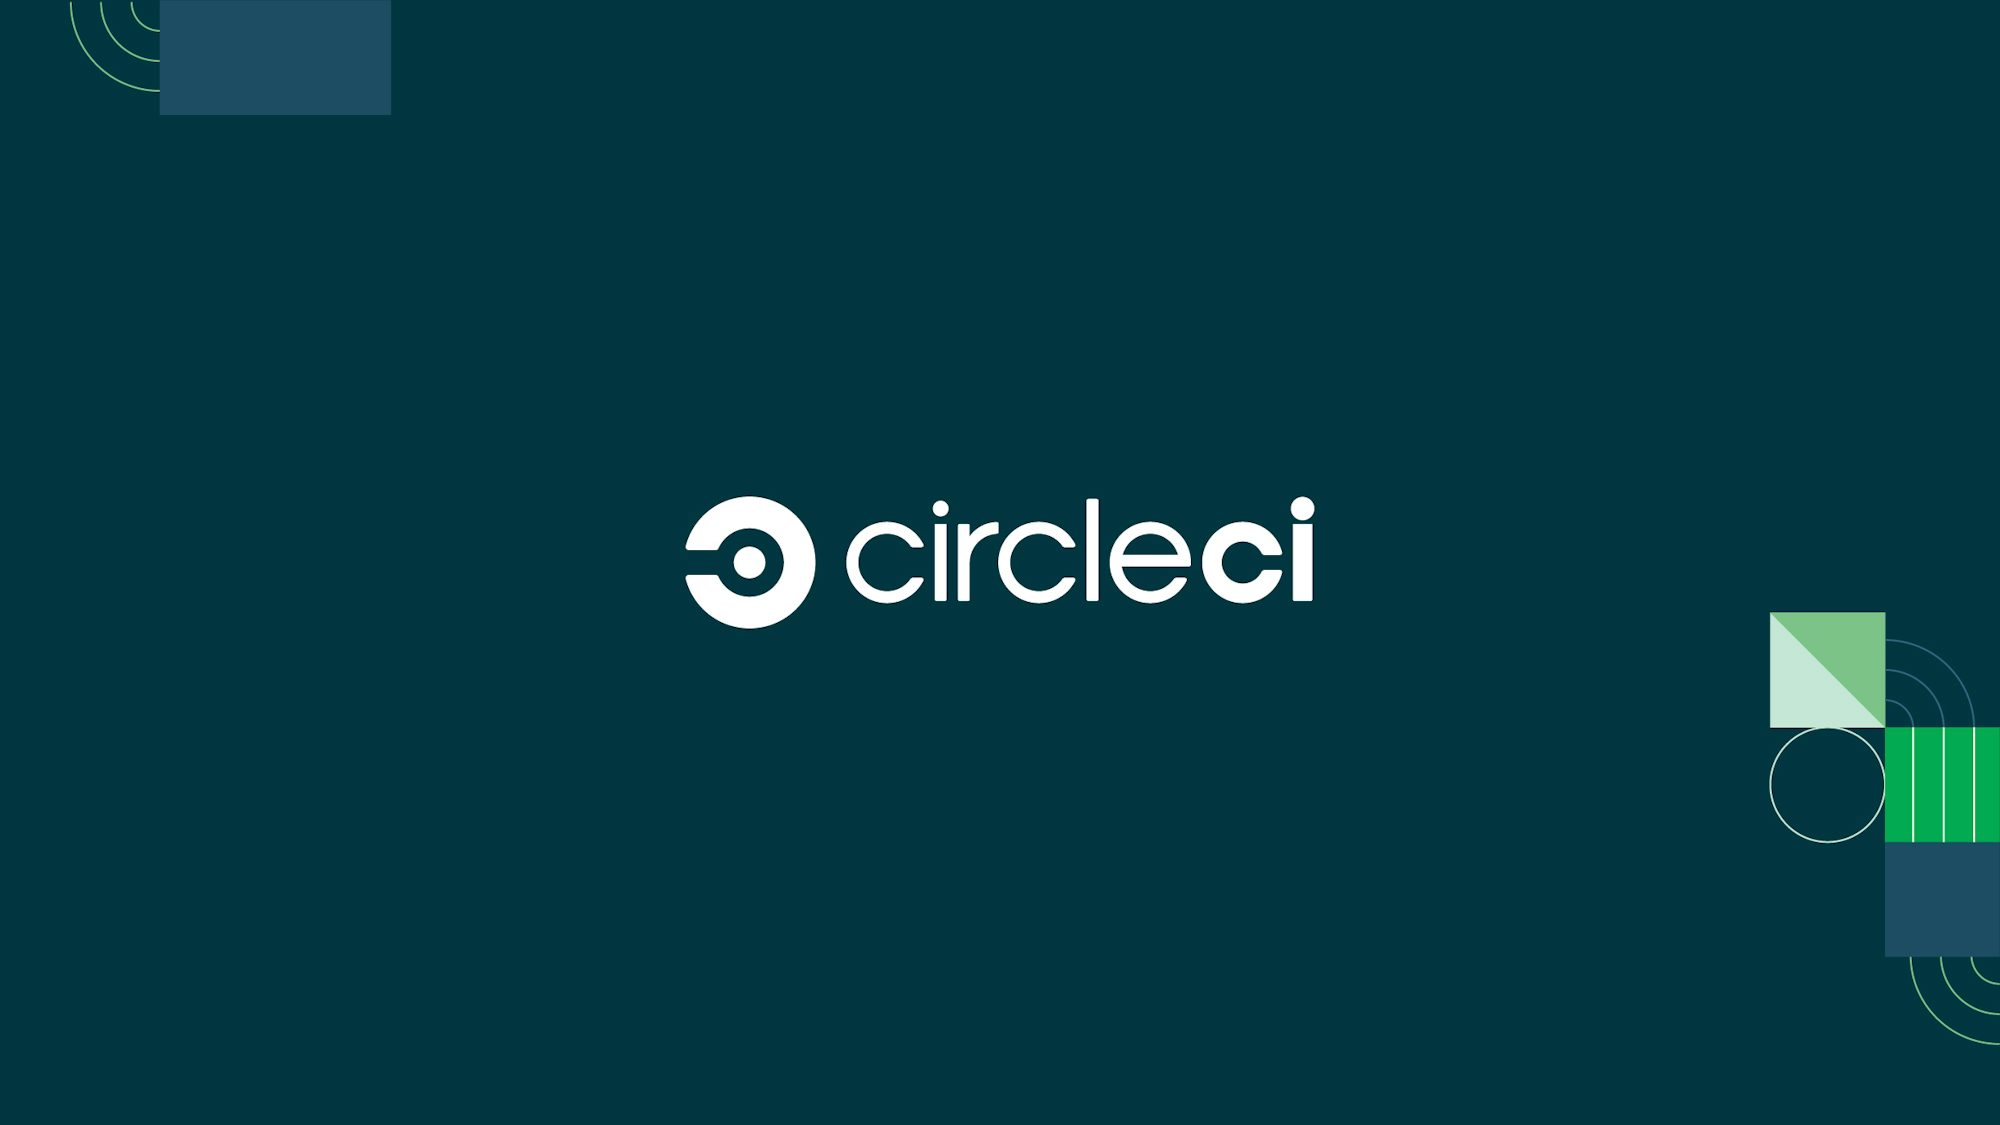 CircleCI logo against a gray and green background.